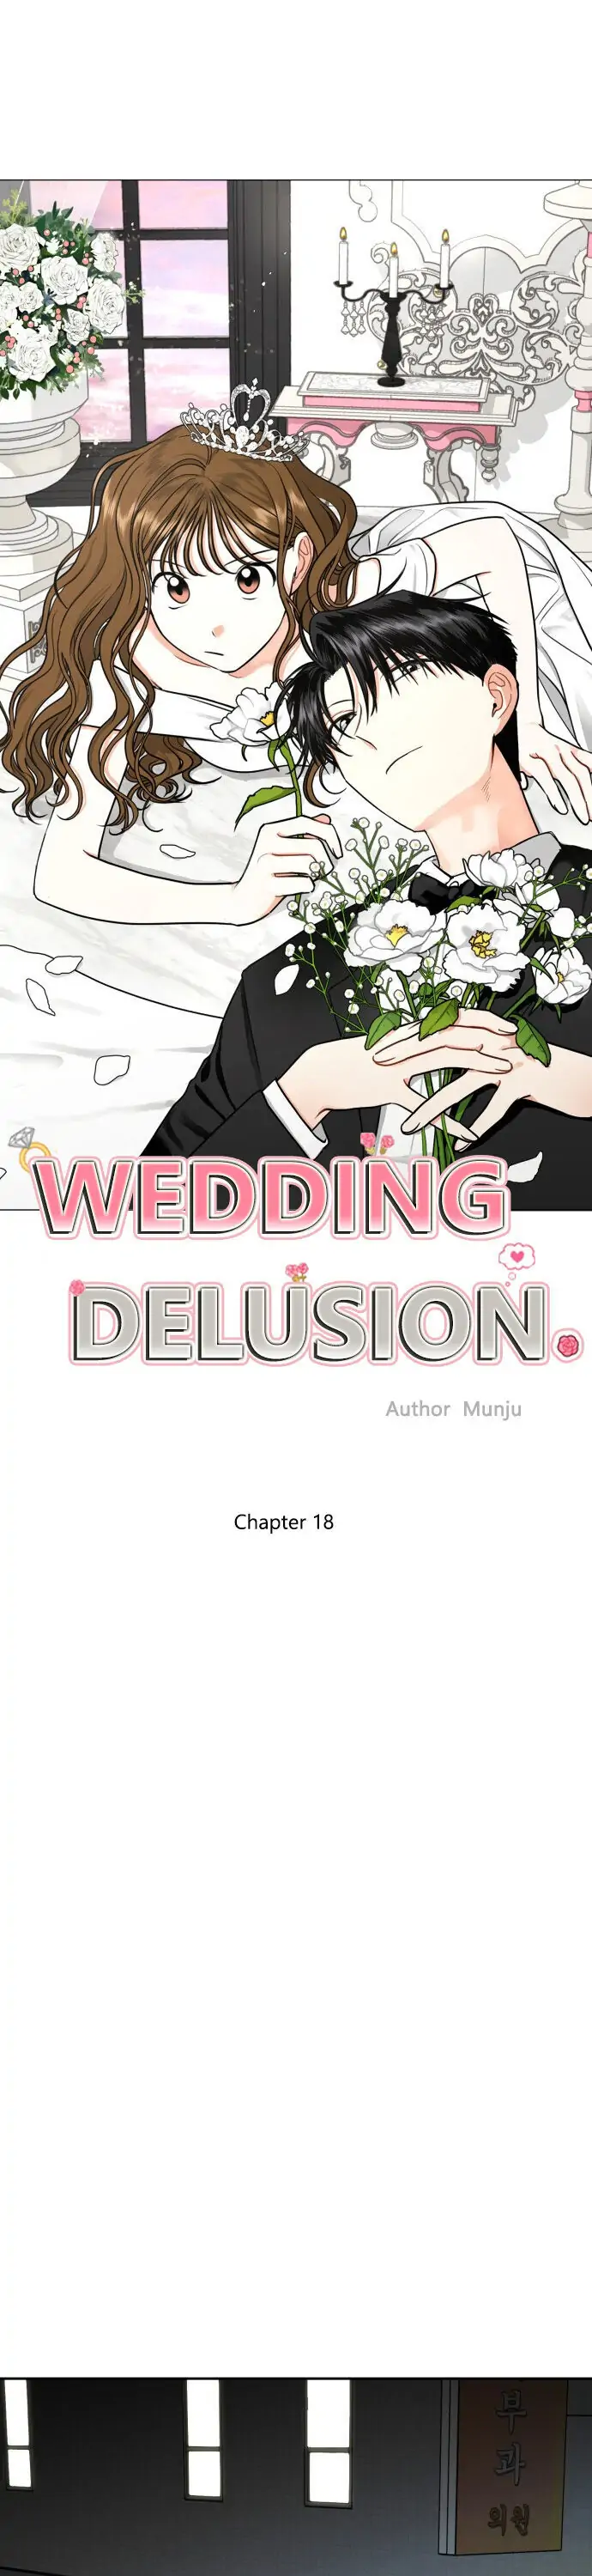 Wedding Delusion chapter 18